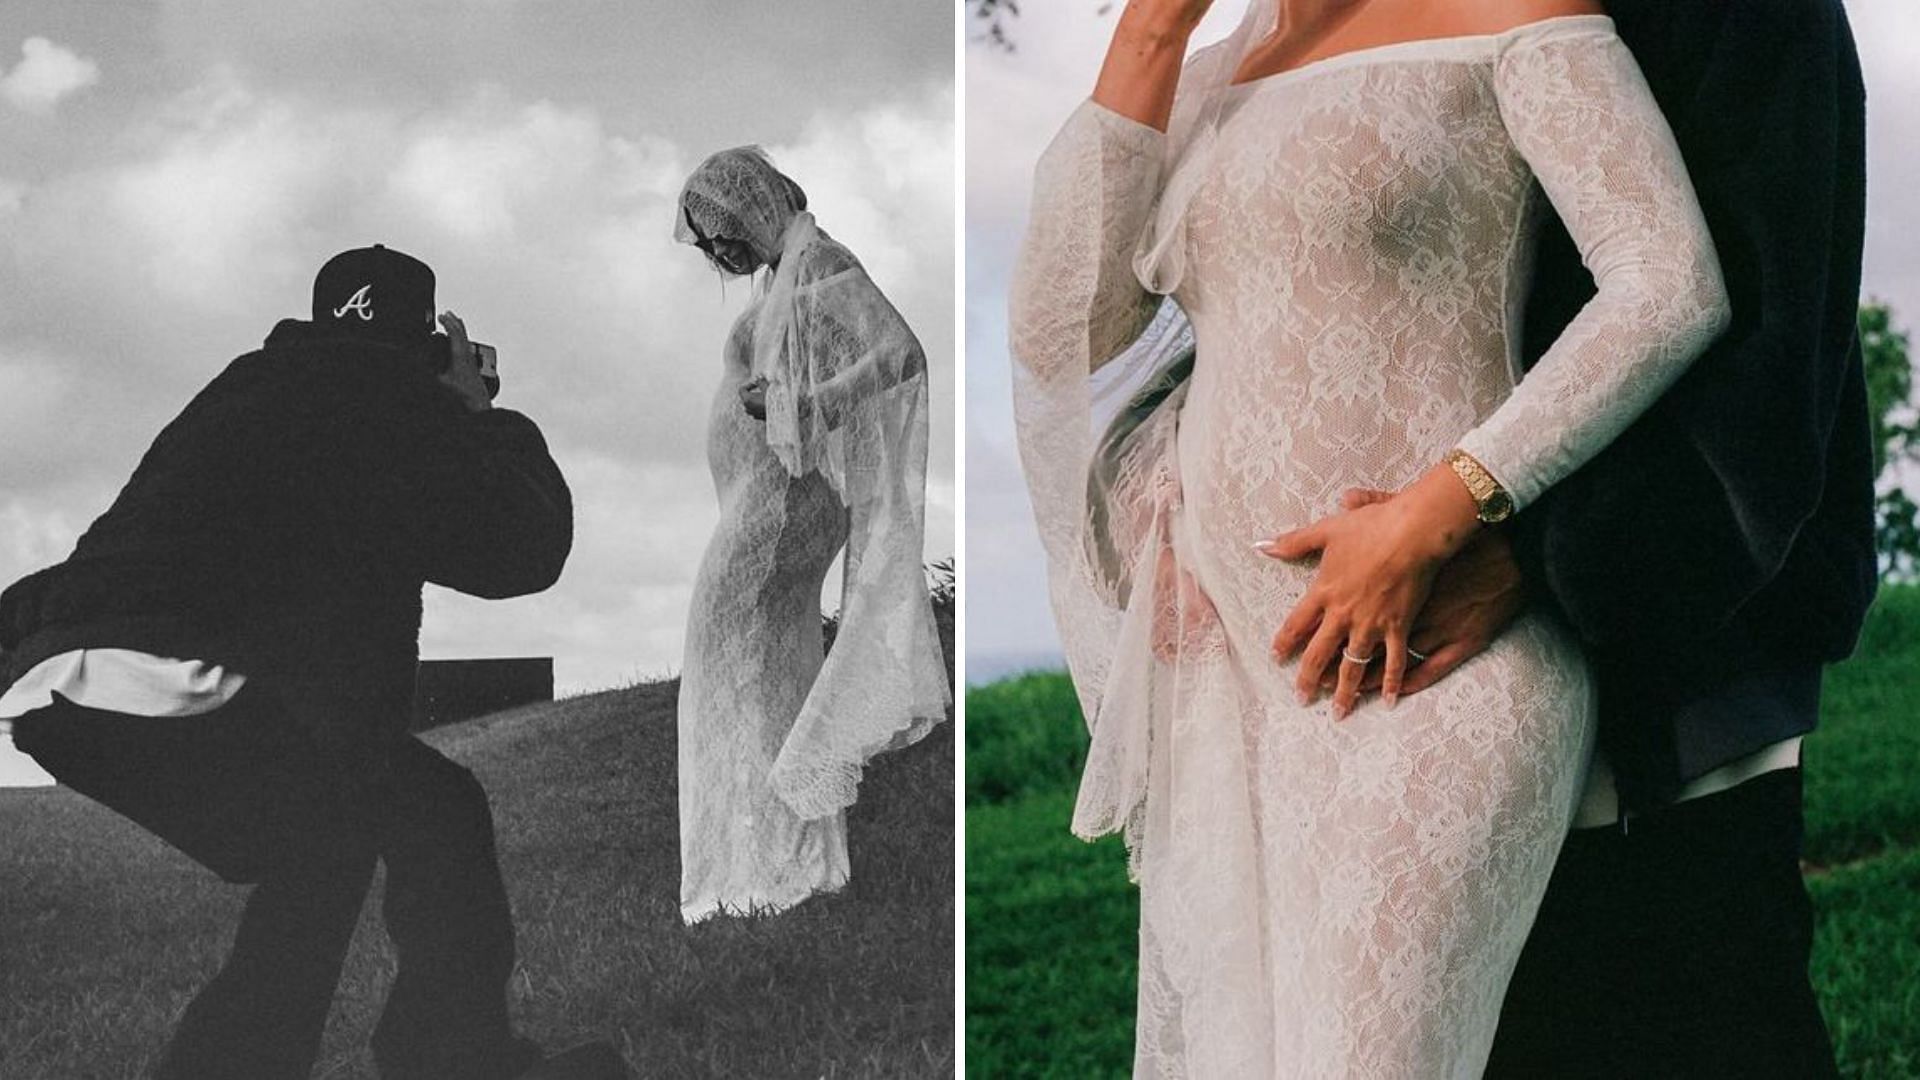 Justin Bieber shows off her belly bump at Hawaii ceremony (Image via Hailey Bieber/Instagram)